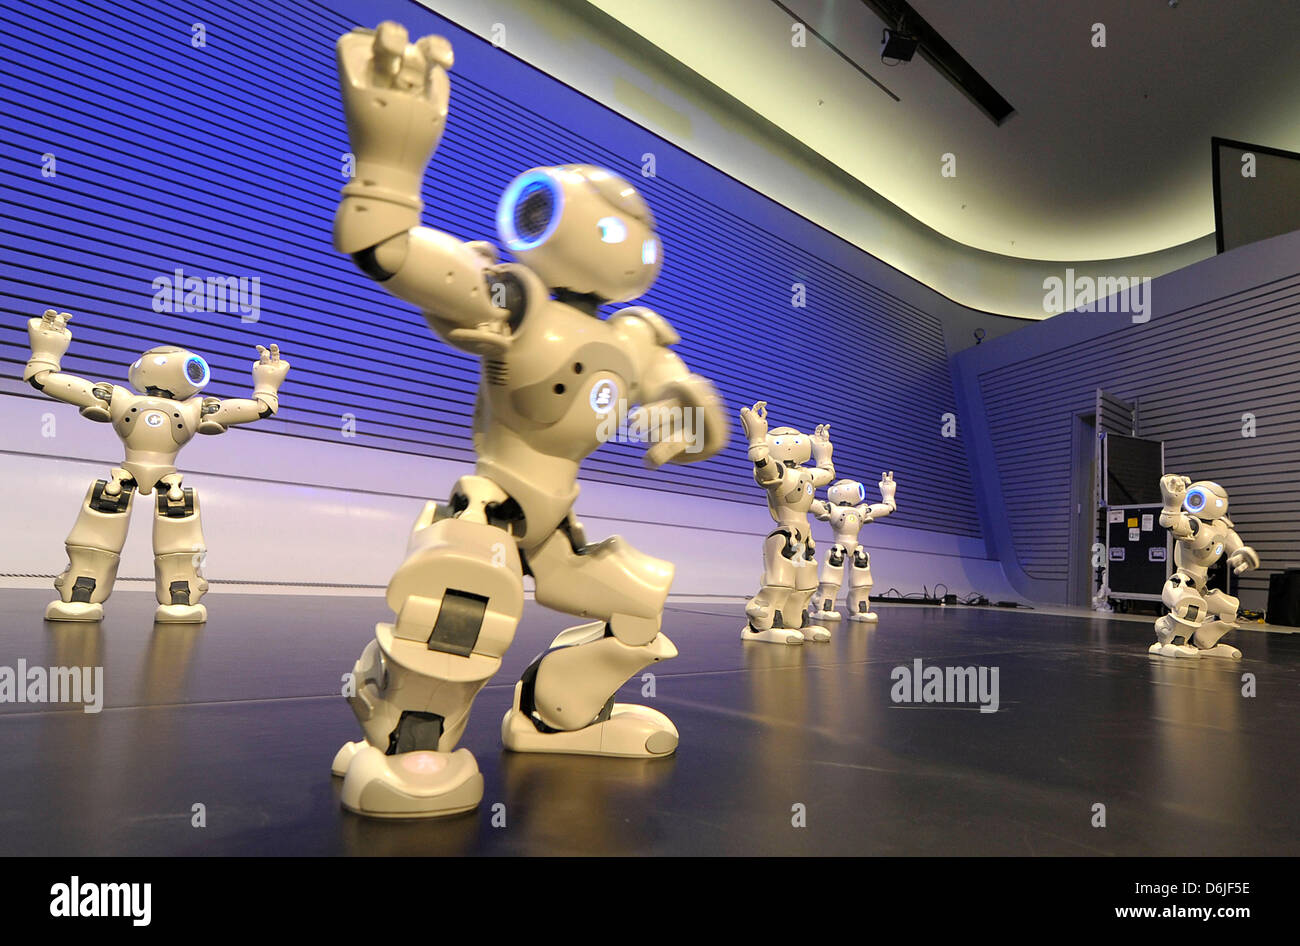 Robots of the "NAO Robot Show" dance at Phaeno Science Center in Wolfsburg,  Germany, 16 March 2012. A robot festival will take place at Phaeno with  robots from all over the world.